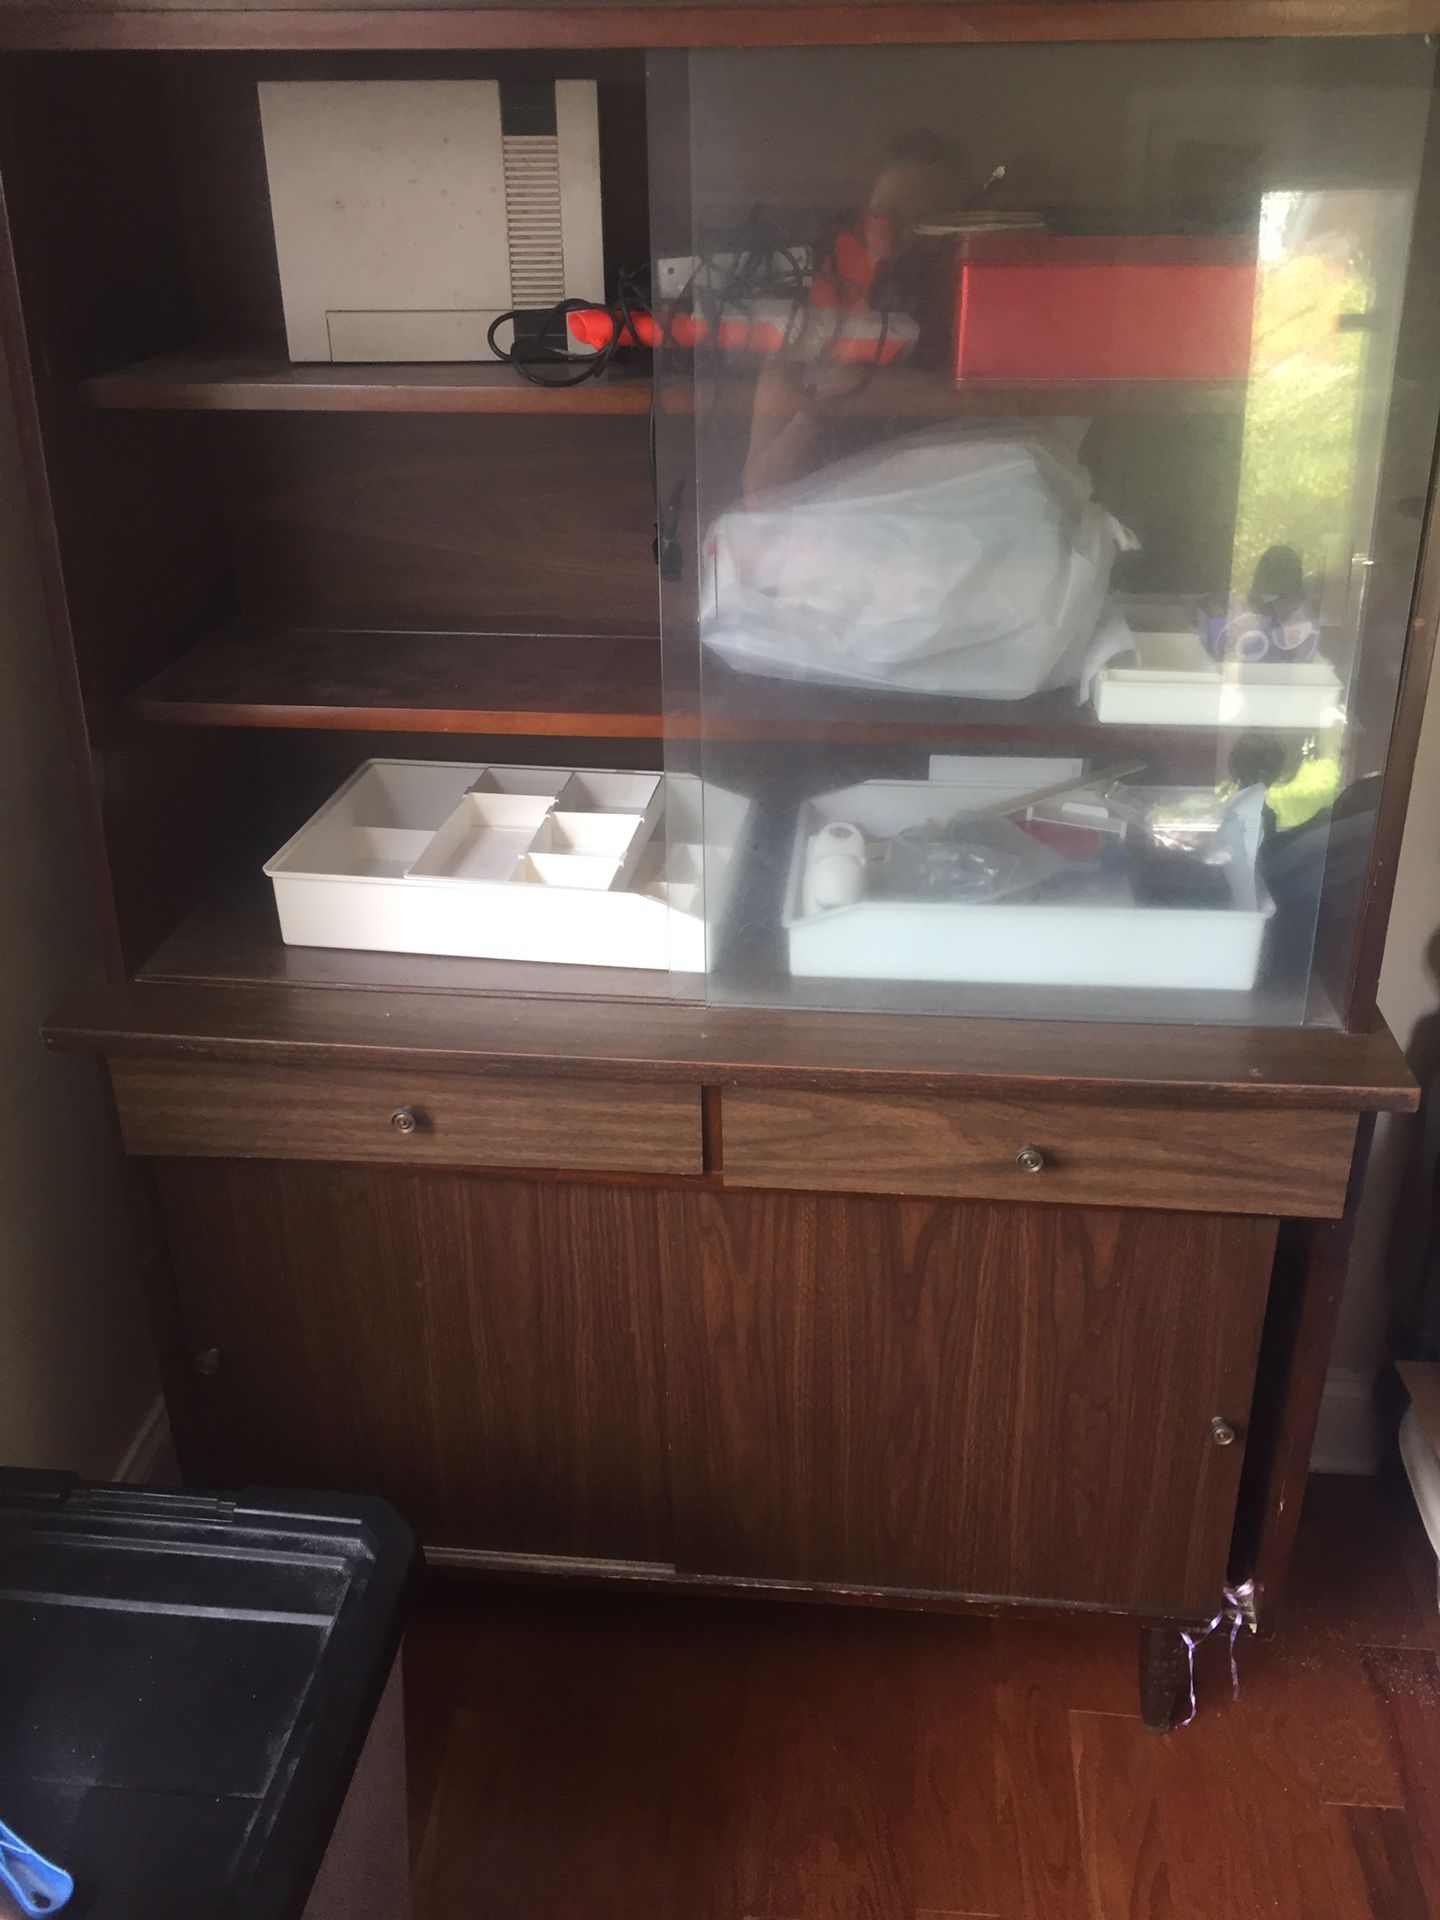 Free cabinet 2 glass sliding doors up top 2 wooden sliding doors below. Cabinet only very heavy must pick up bring help